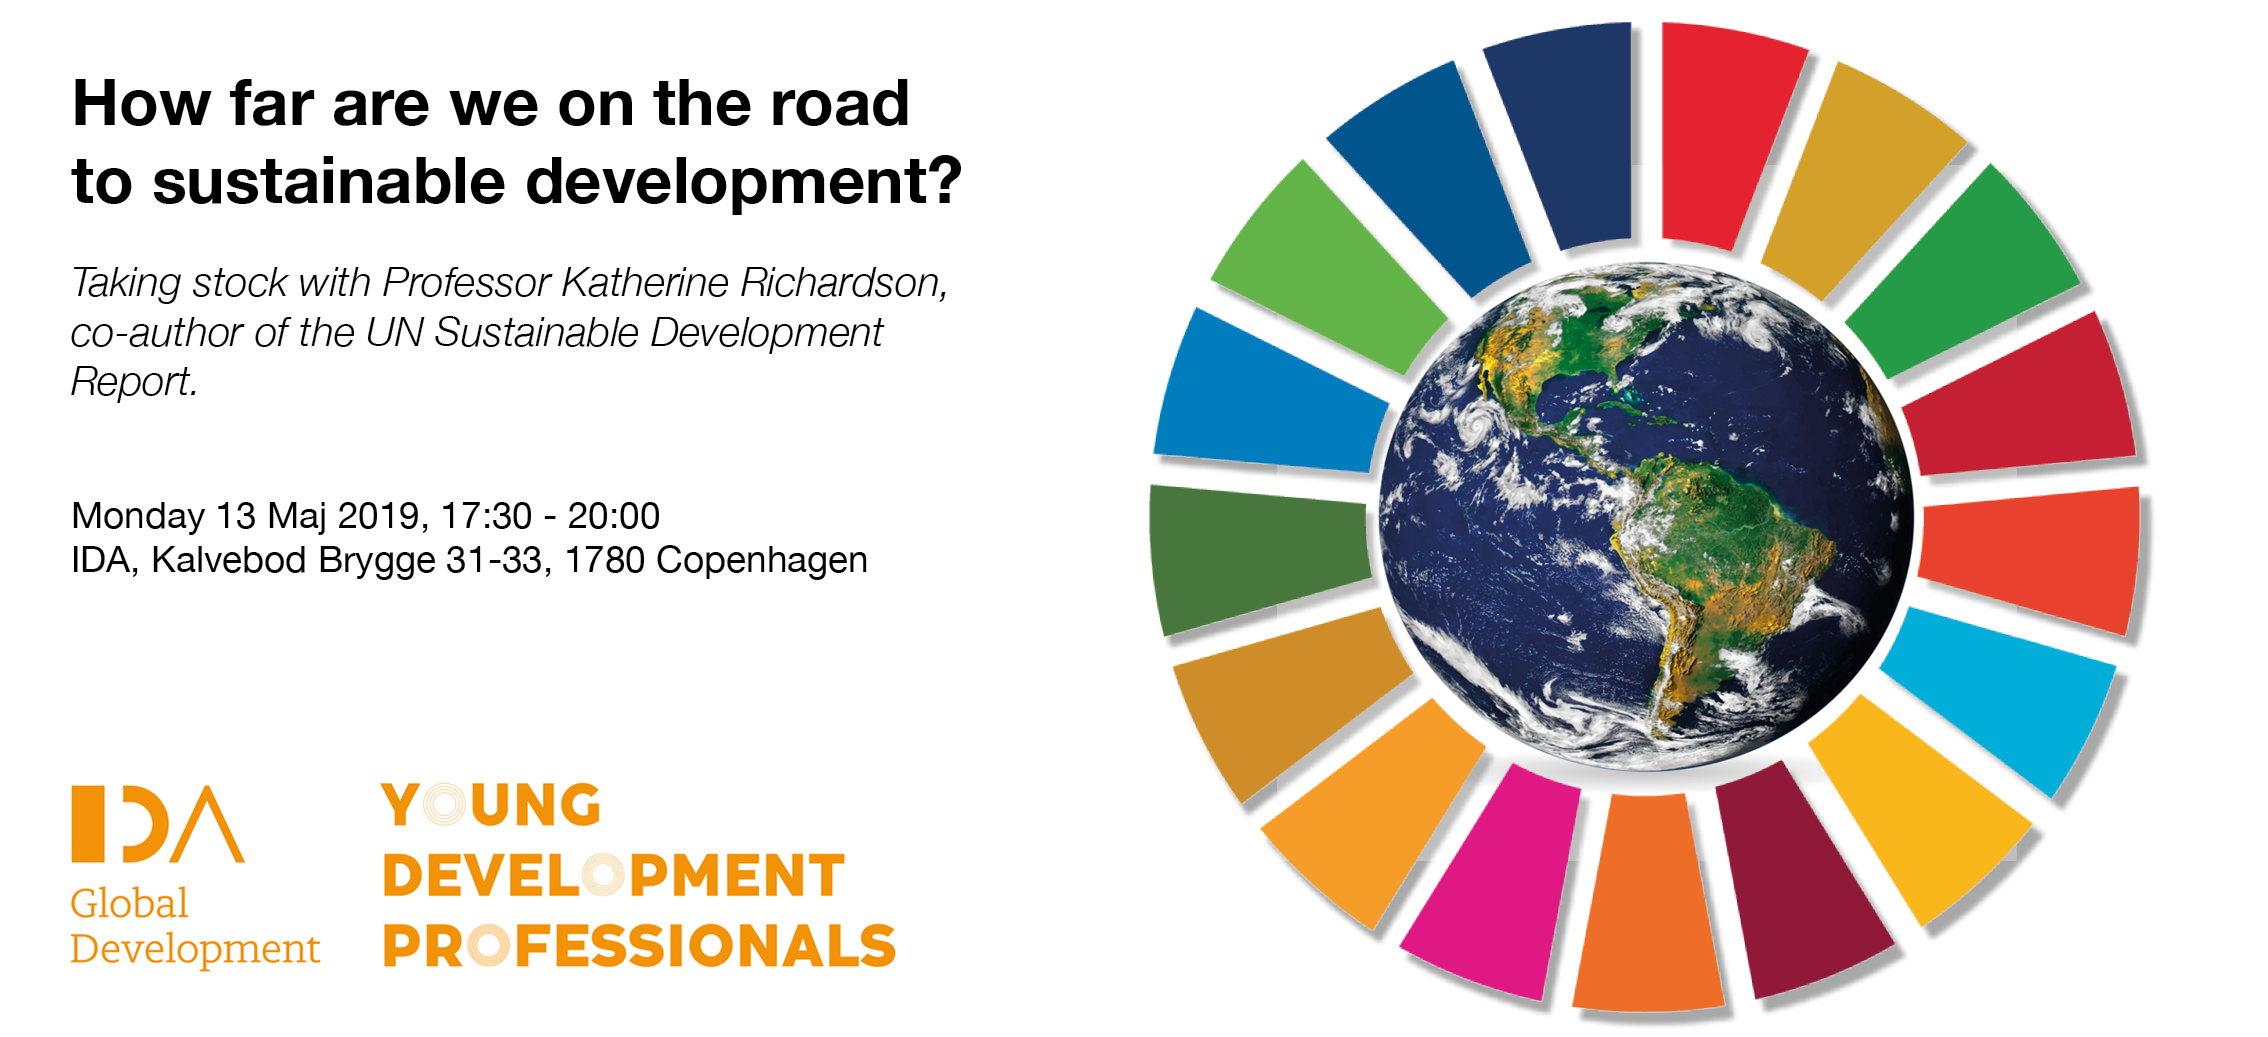 How far are we on the road to sustainable development? 